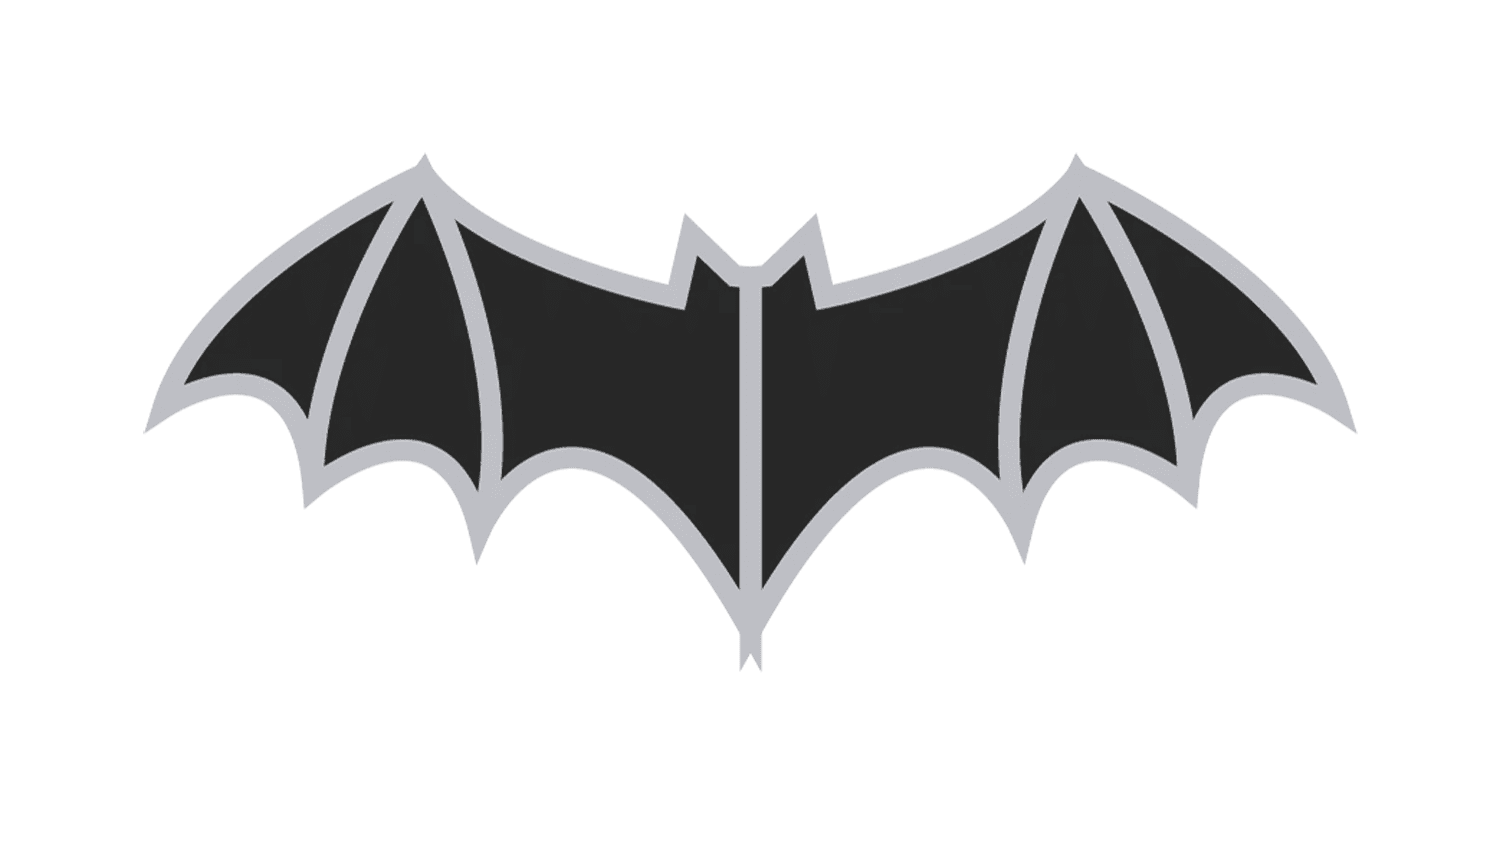 Batman Logo and symbol, meaning, history, PNG, brand